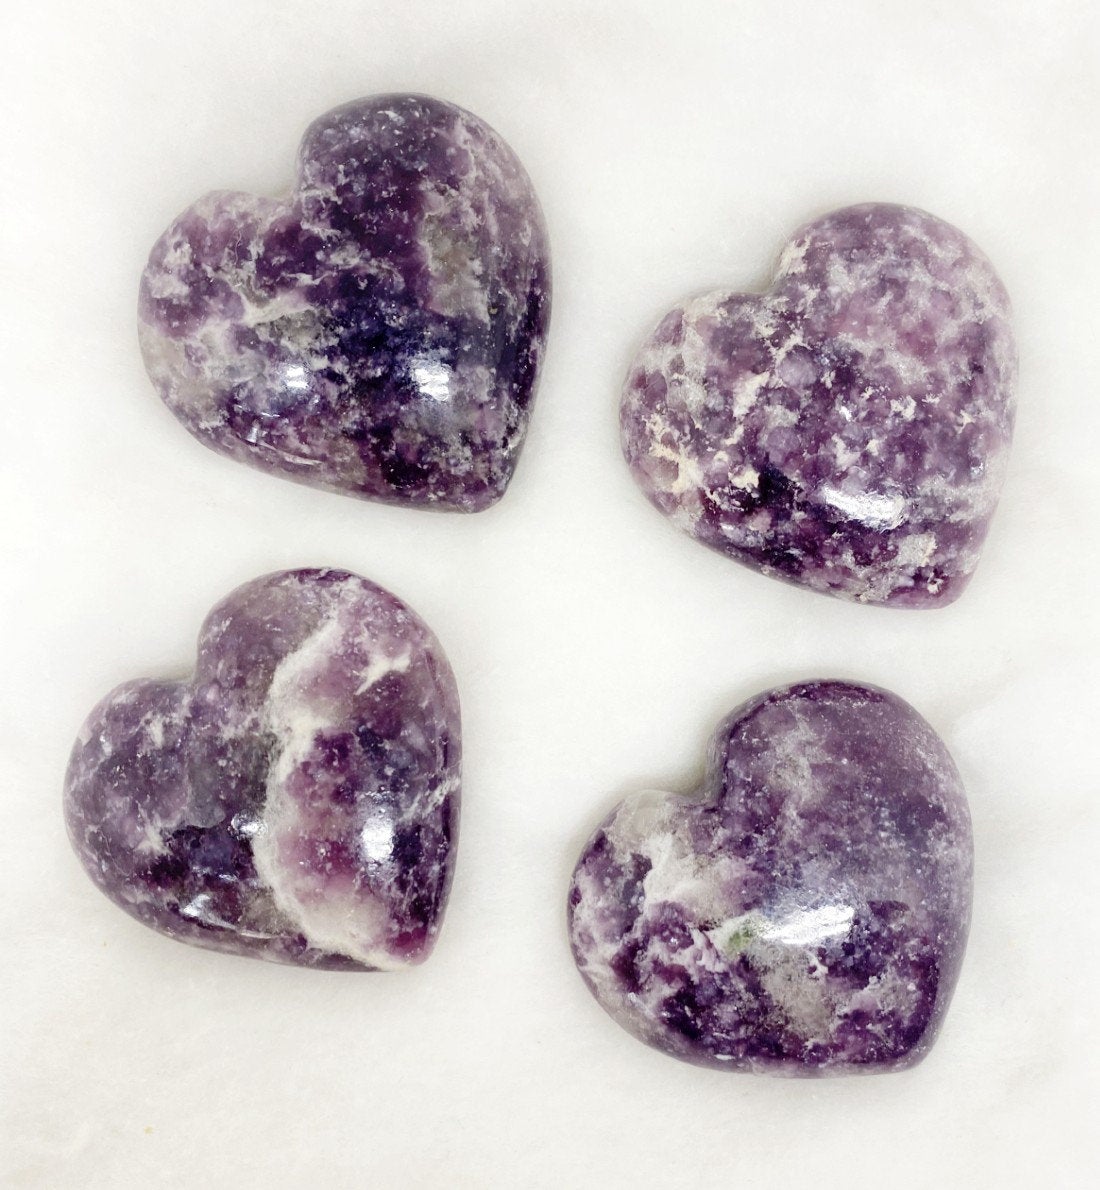 Buy The Best Lepidolite Crystal Hearts Products Online - Soothing Crystals